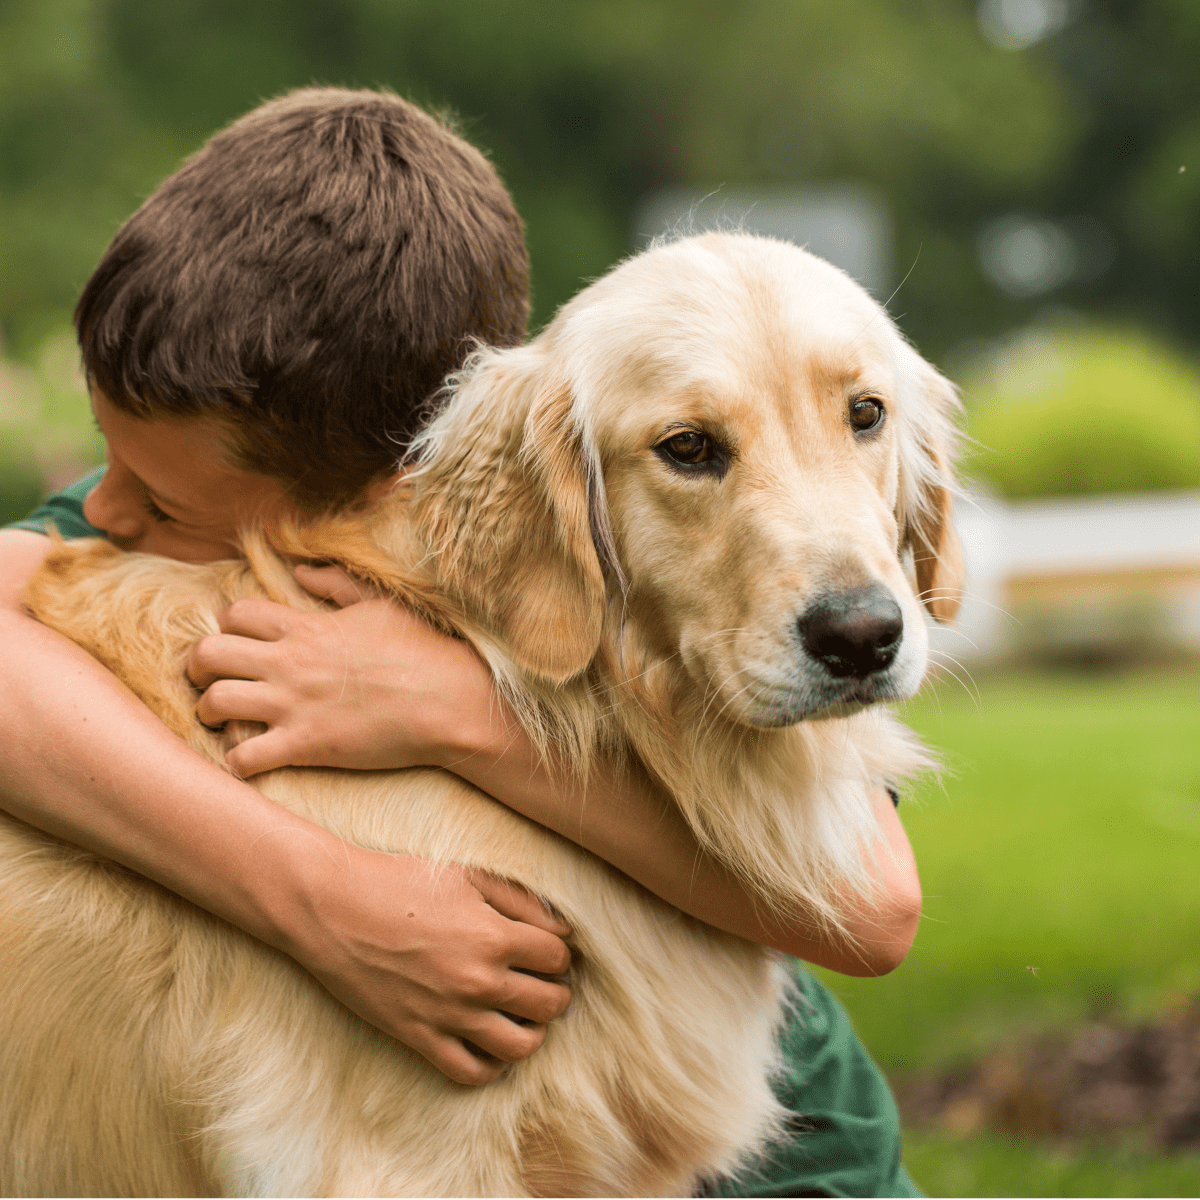 how to train a dog for autistic child